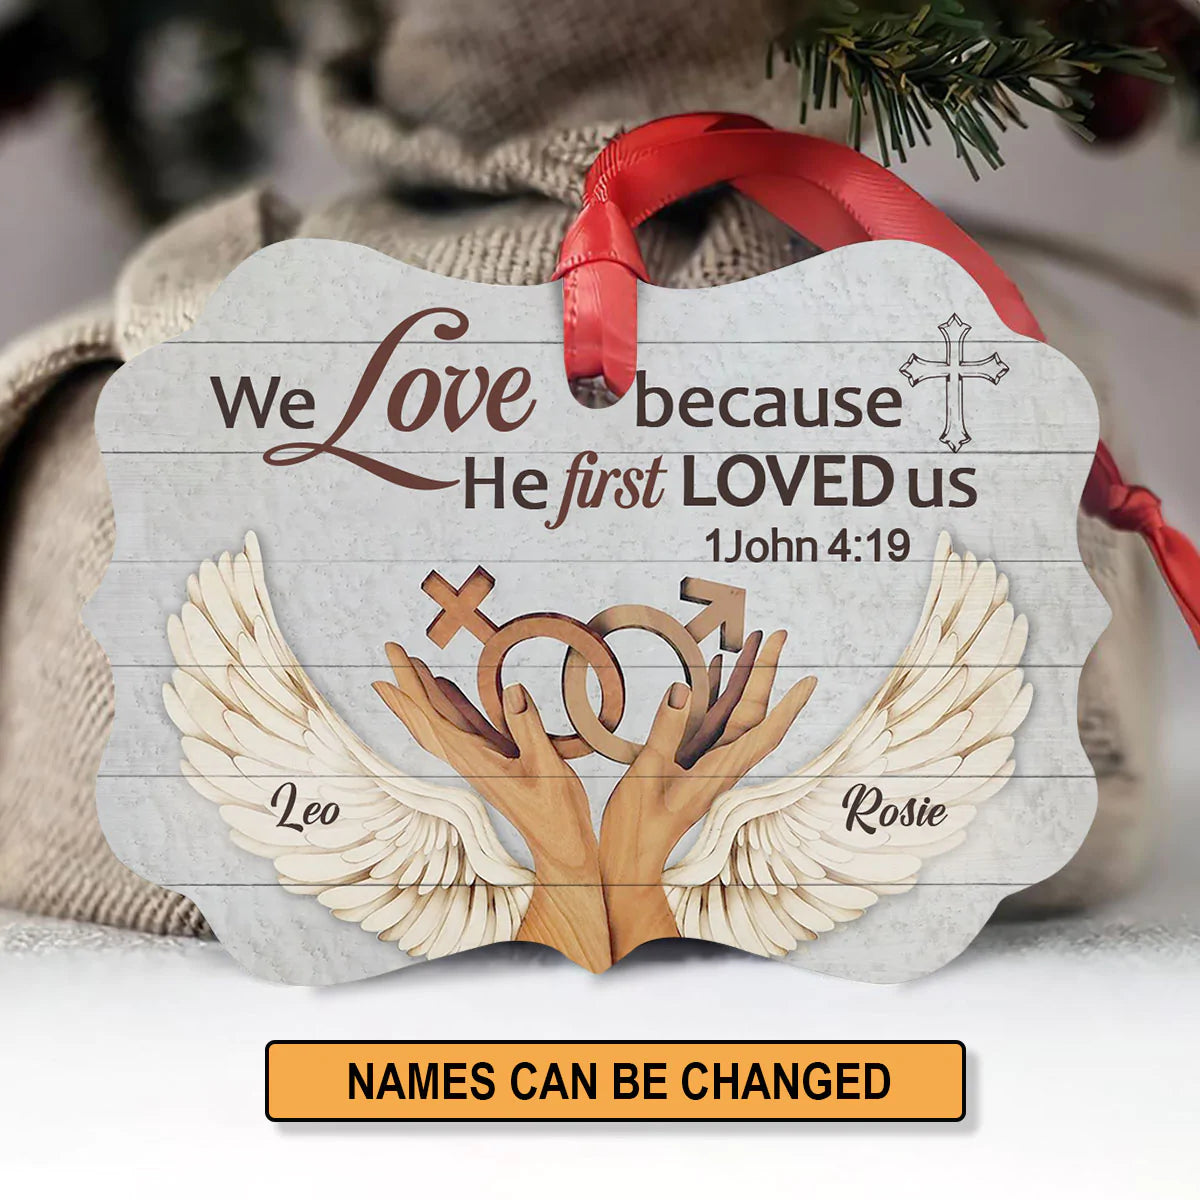 Couple Aluminum Ornament - Personalized Cross, Wings, Hands, Gender Symbol Aluminium Ornament - Custom Gift For Christian Couple, Spouse, Lover - We Love Because He First Loved Us